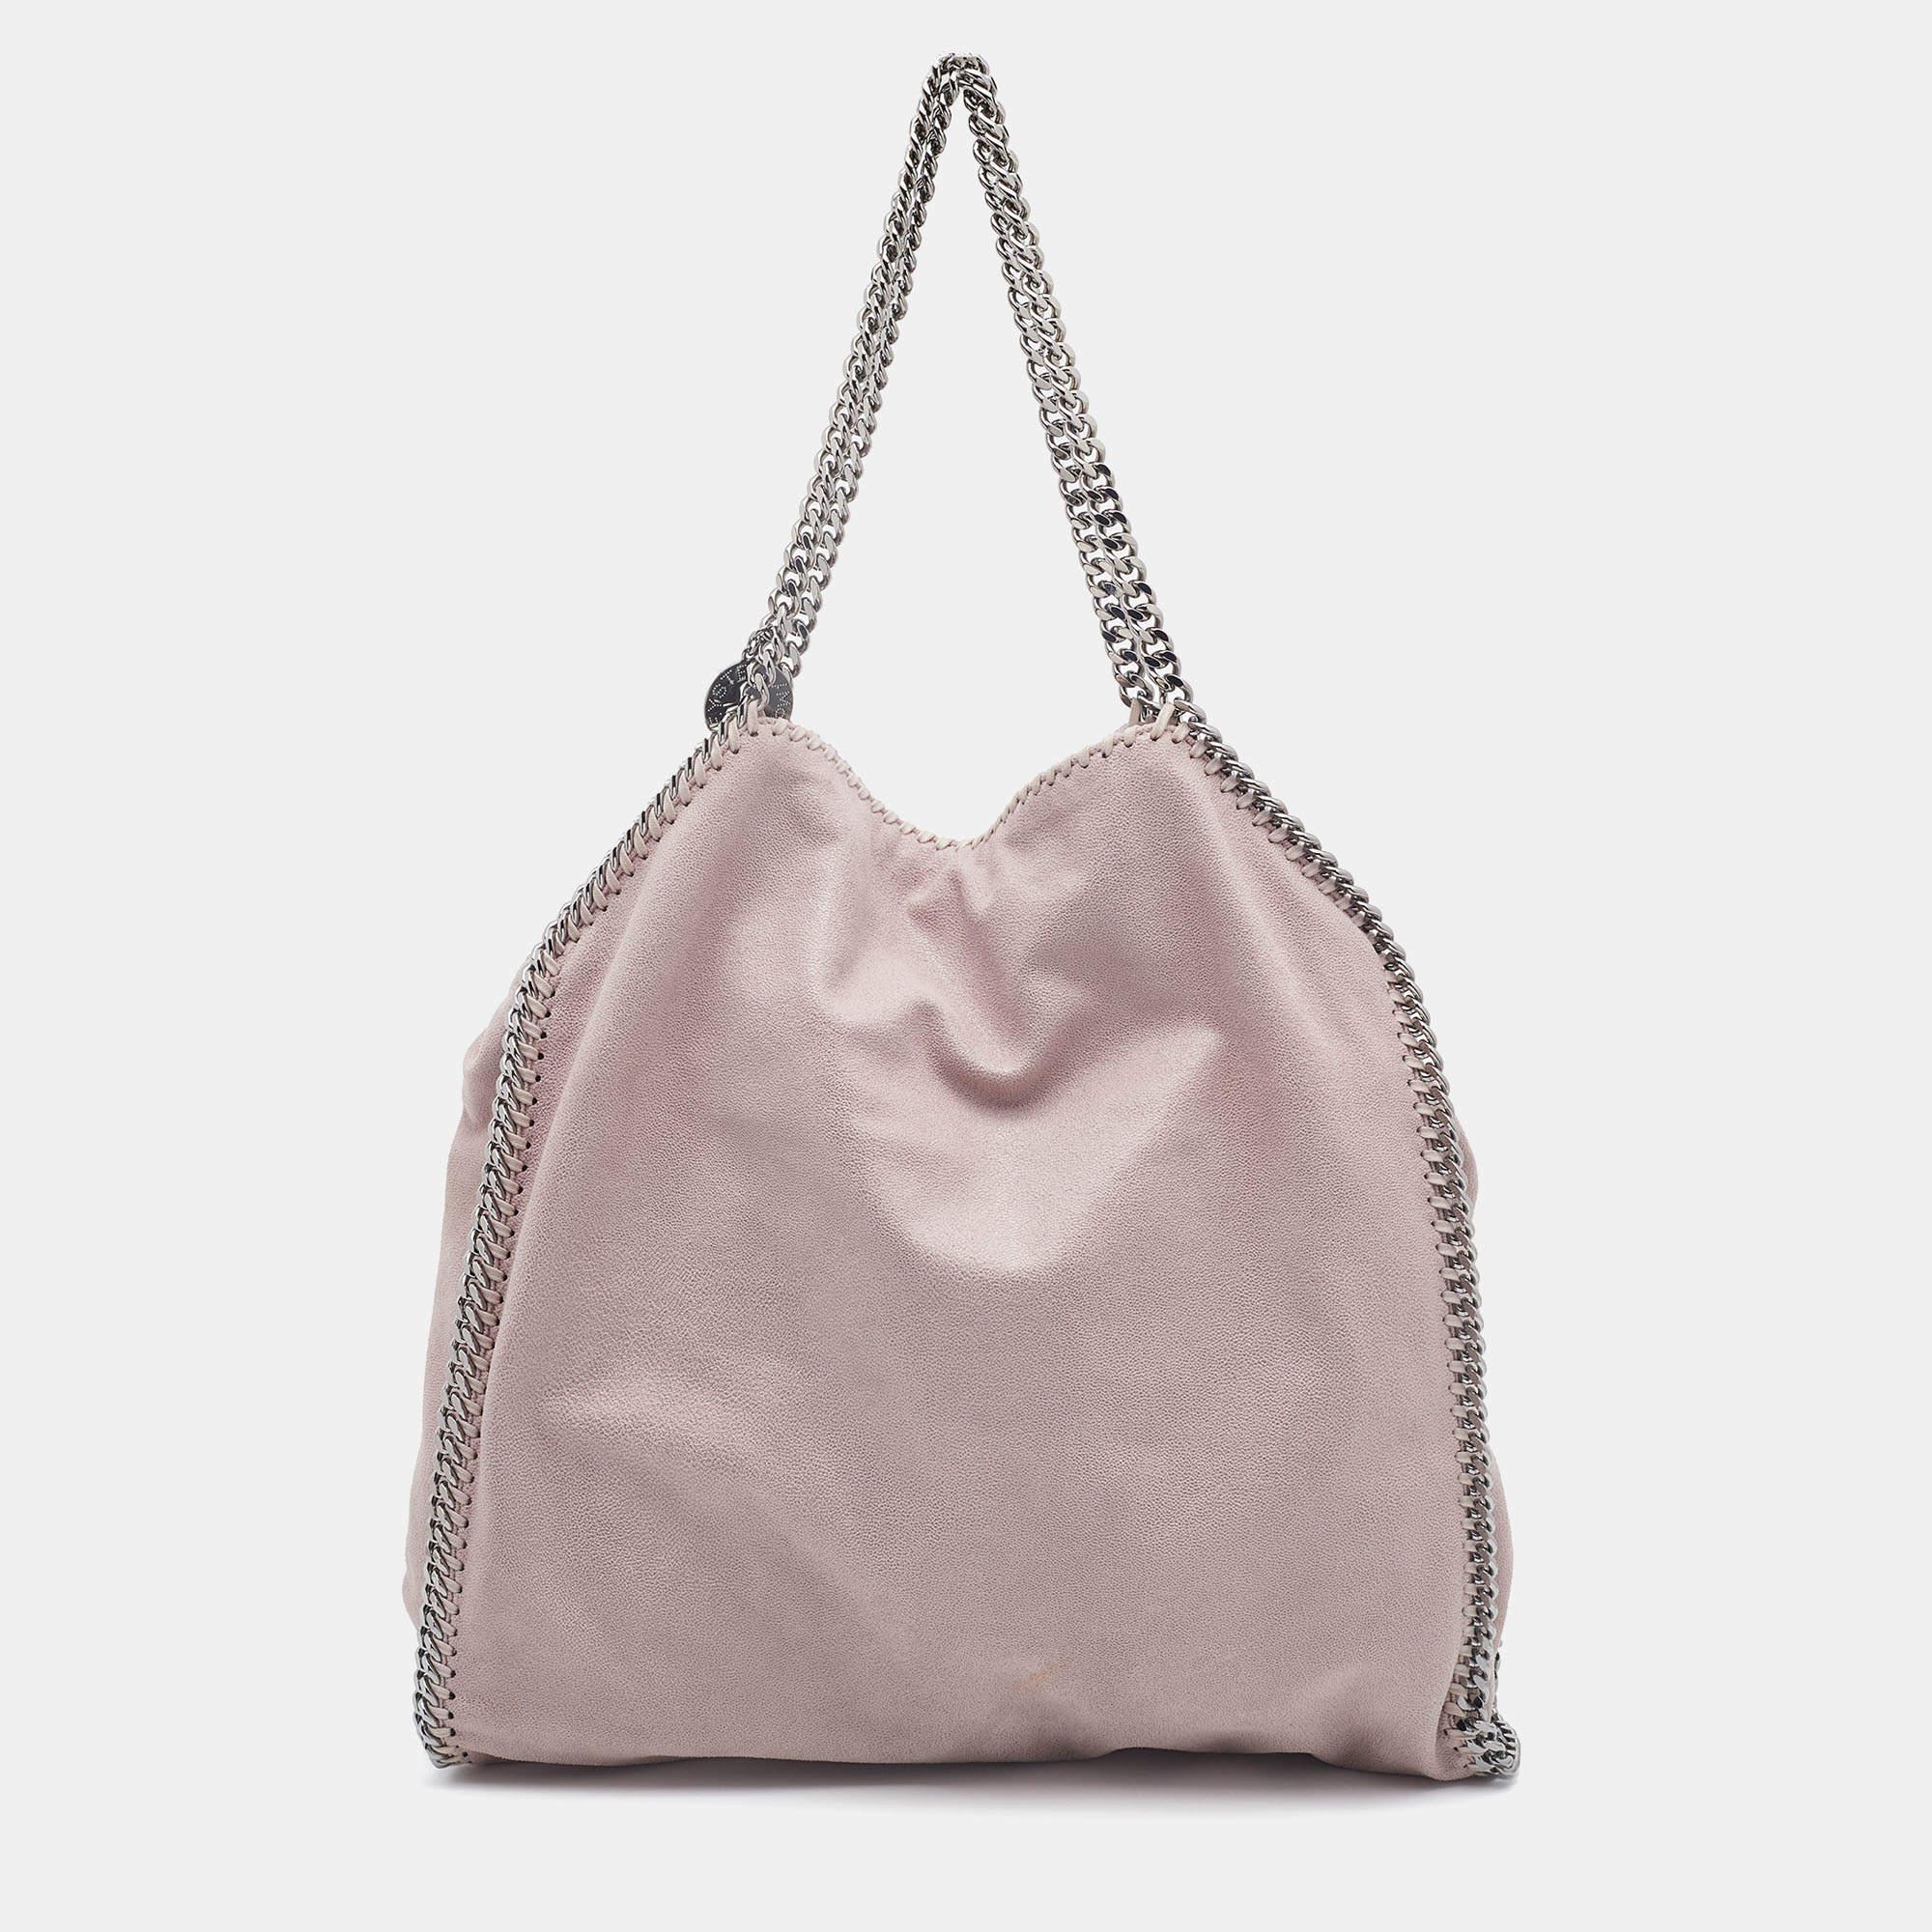 The chain whipstitch detailing beautifully outlines this Stella McCartney Falabella tote. Crafted from faux leather, it is adorned with gun metal-tone accents, and its fabric-lined interior can safely store your necessities. Carry it in a chic way